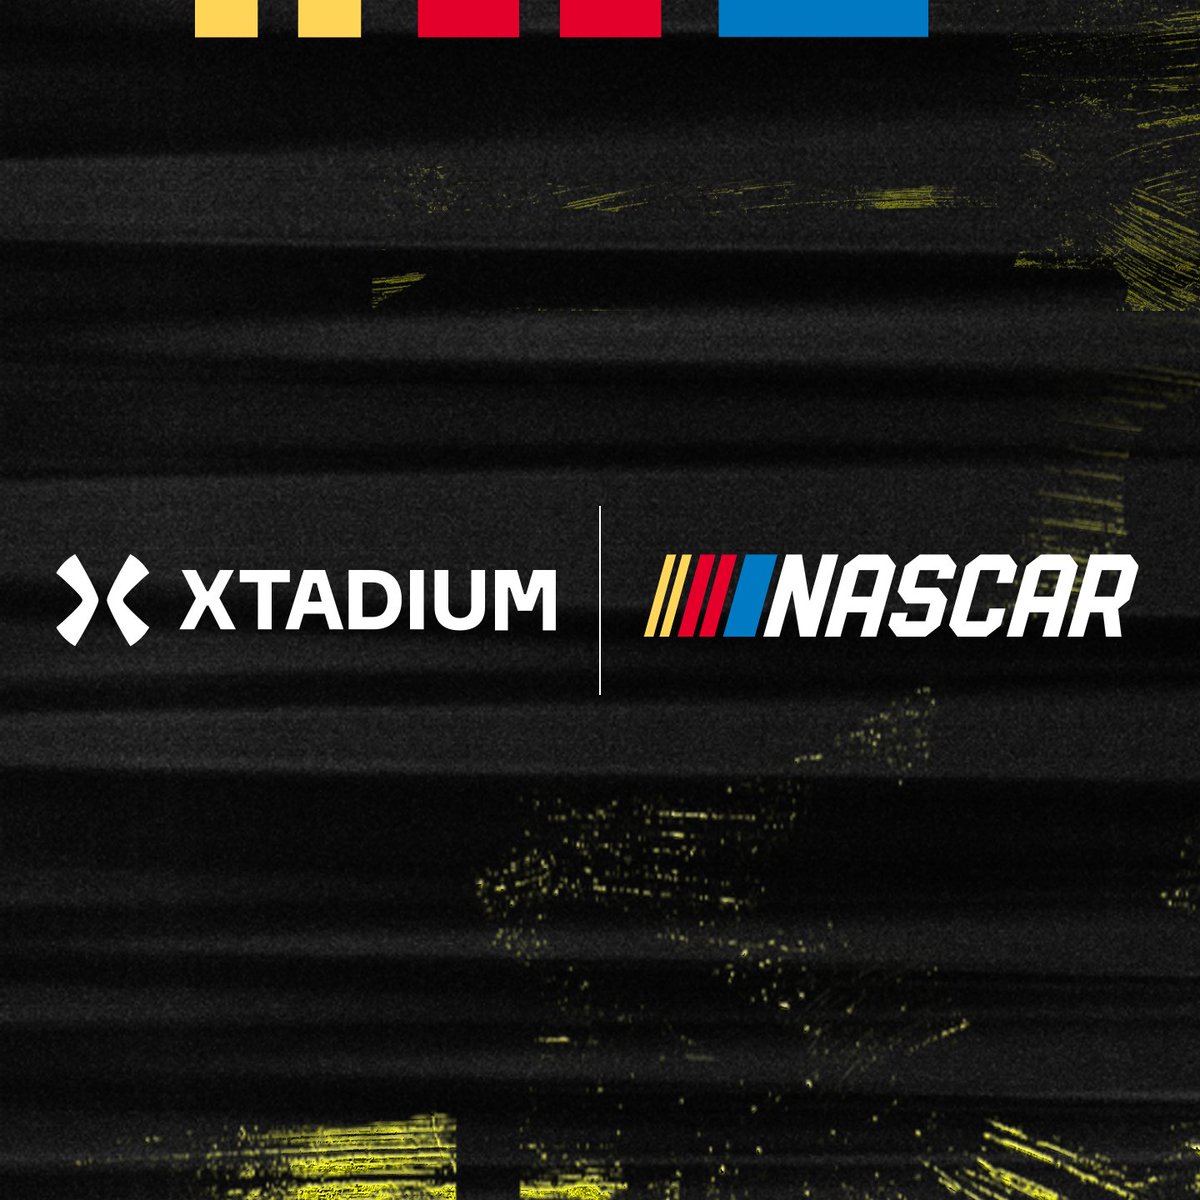 If you've missed the @NASCAR race over the weekend, you can watch the replay in Xtadium! Hop inside your @MetaQuestVR headset, and open Xtadium to watch the race replays. #NASCAR #VR